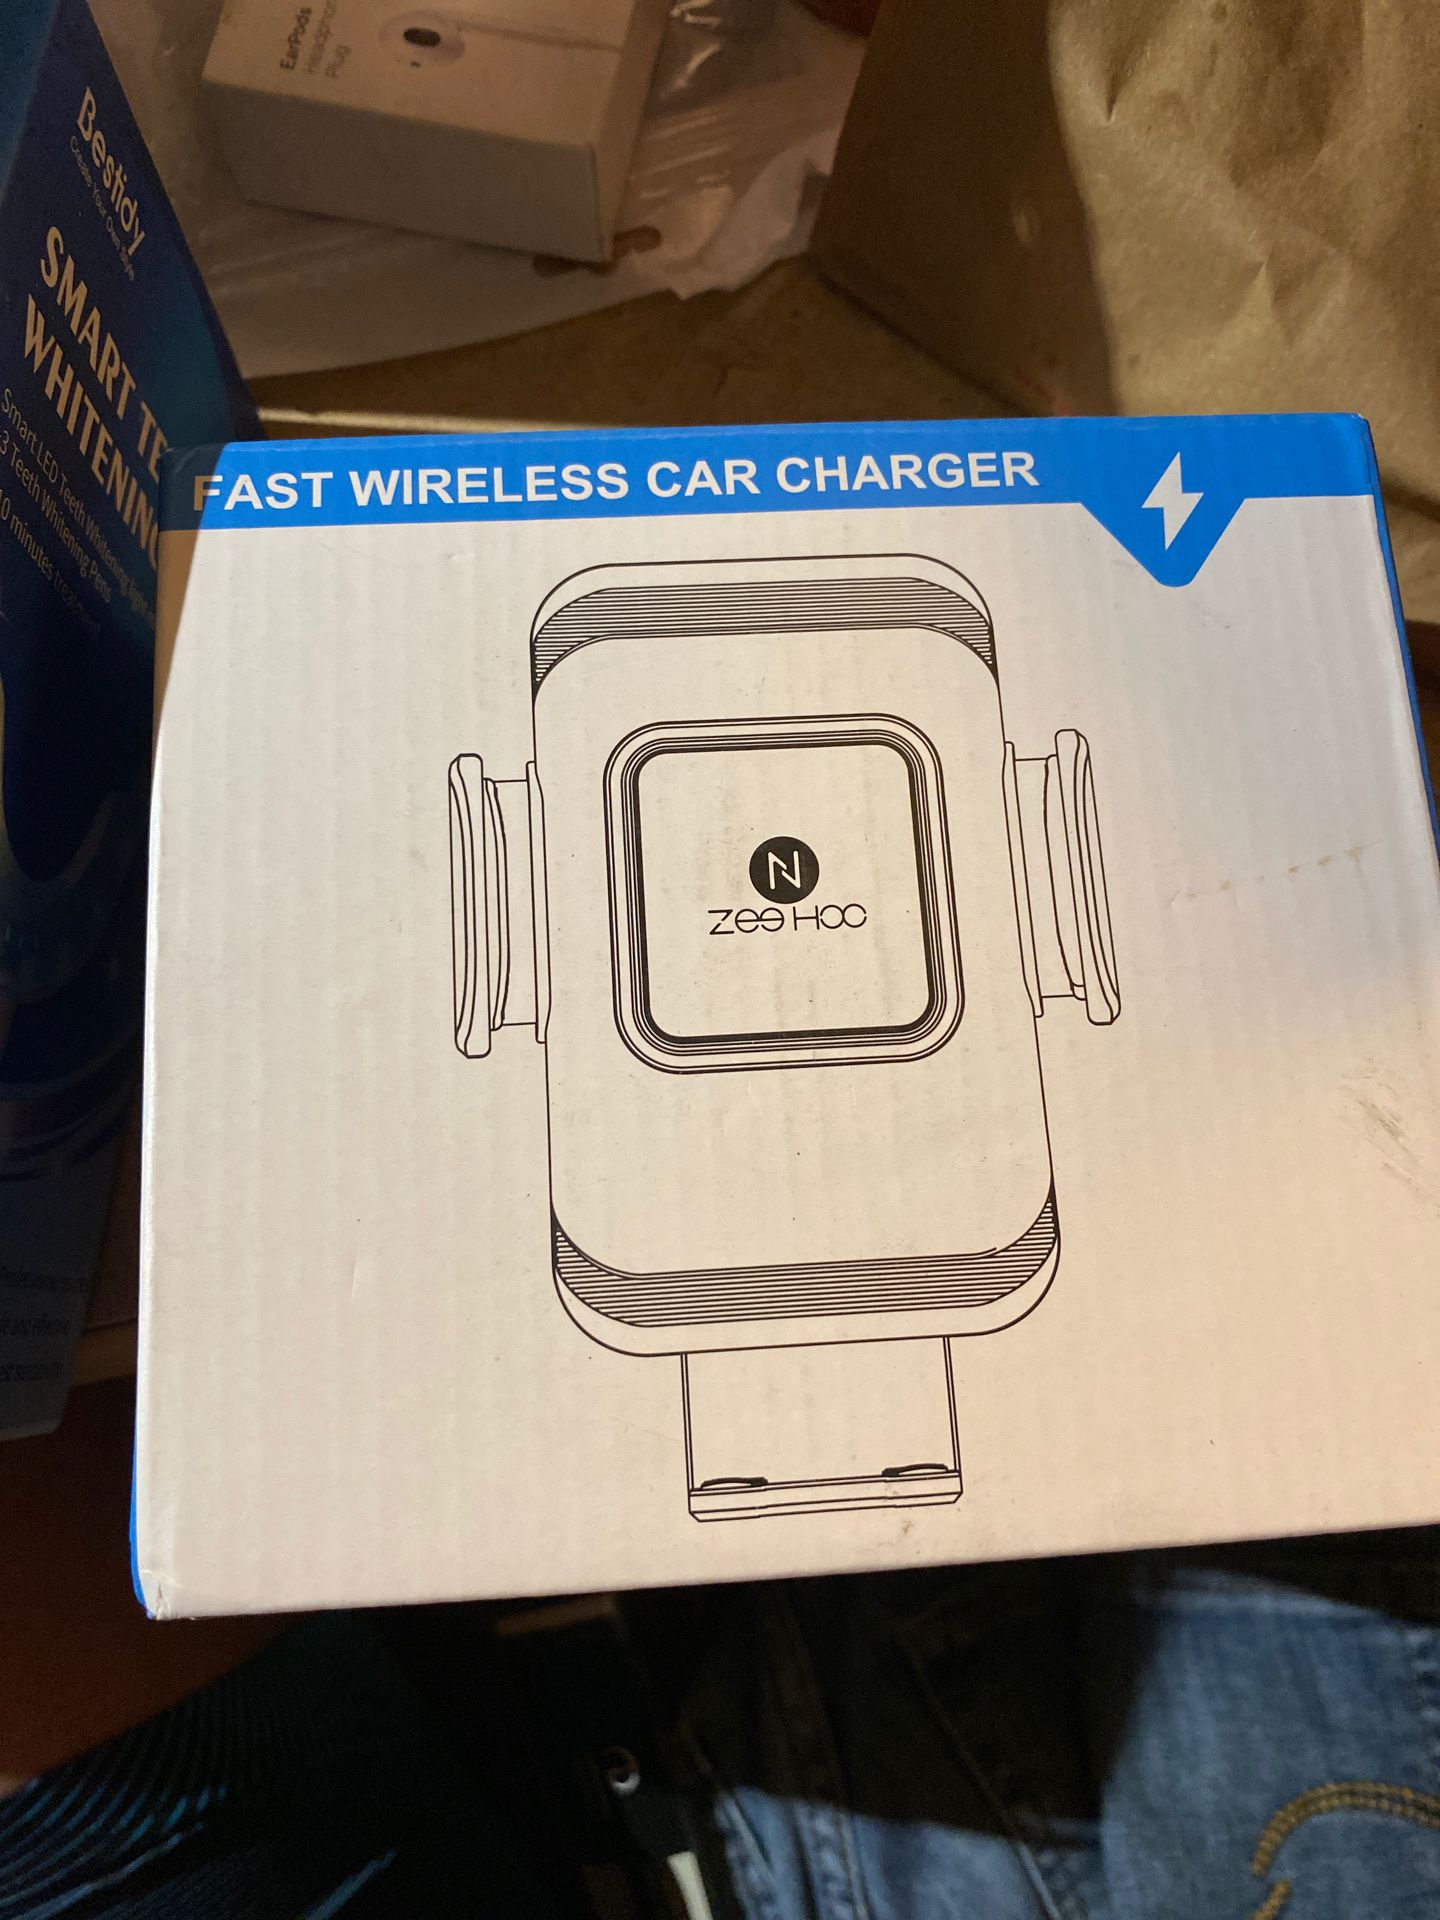 Fast wireless car charger